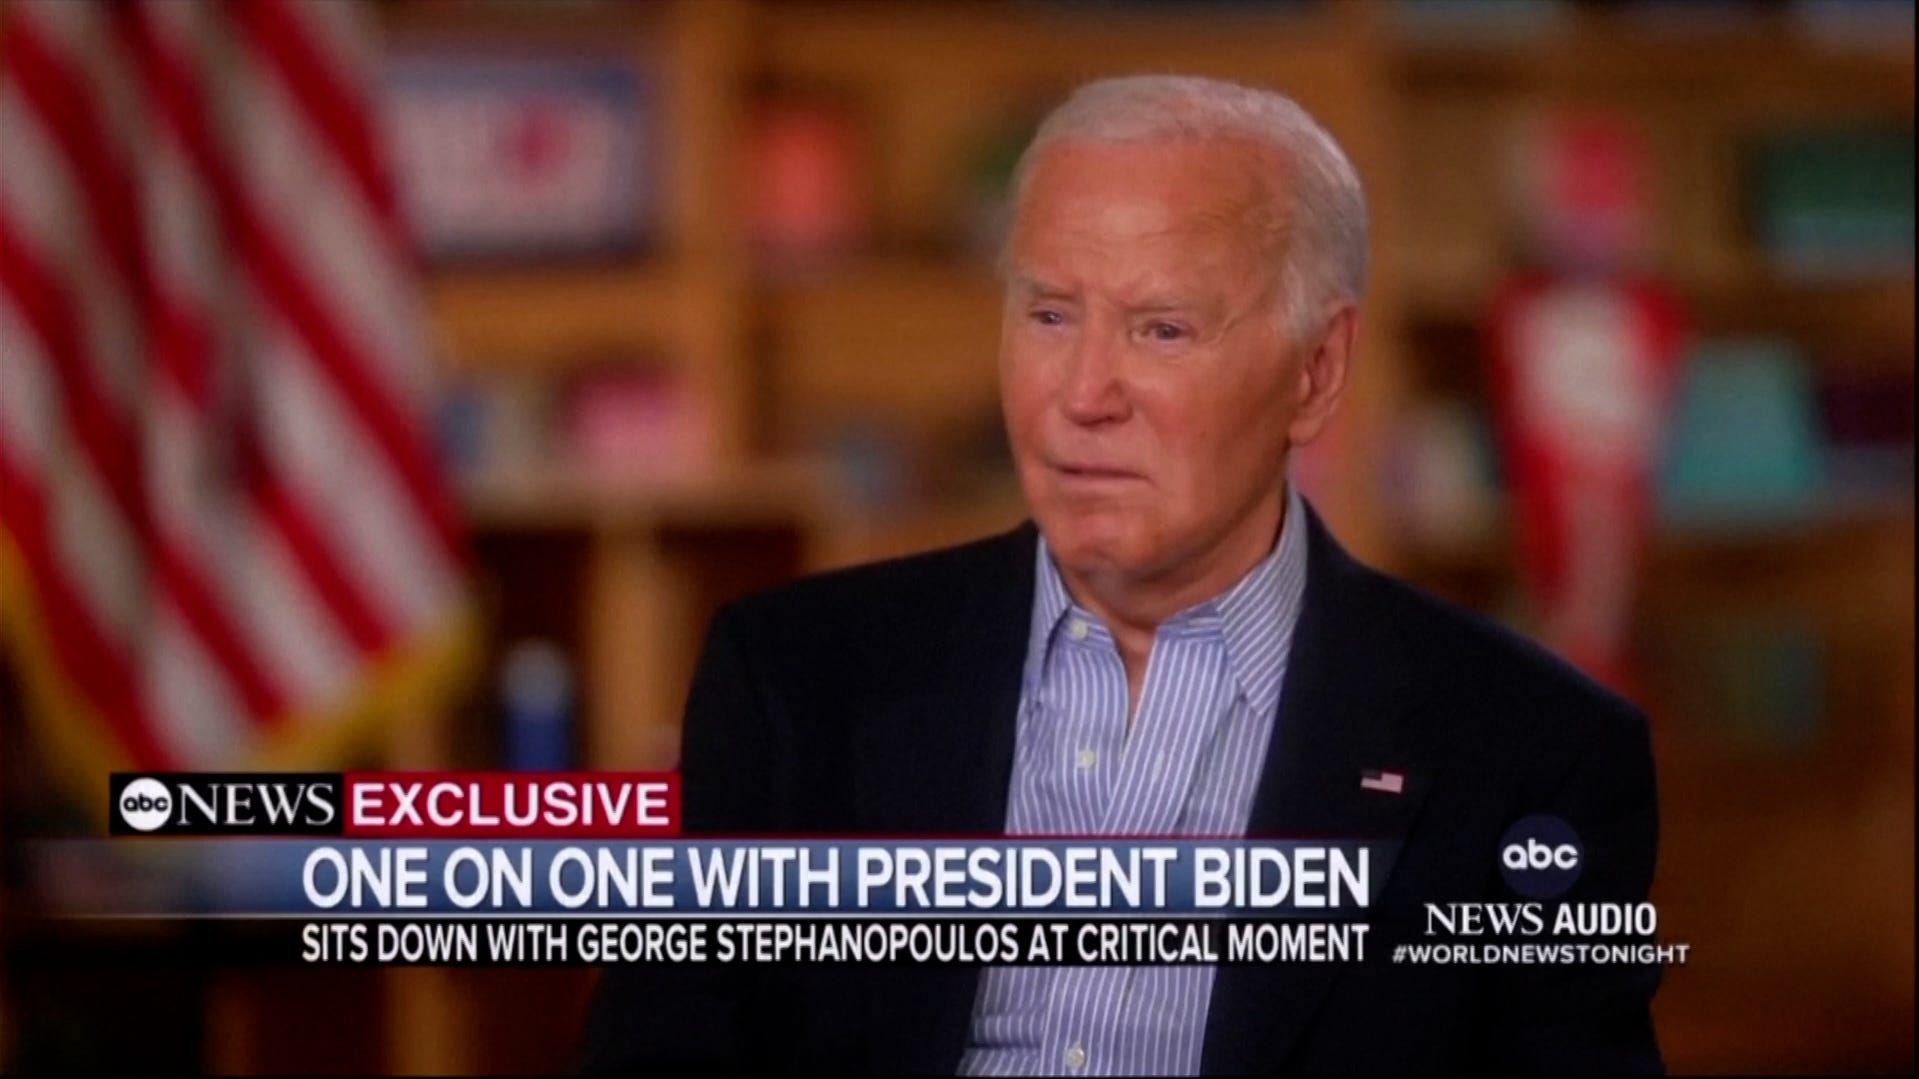 Biden defends himself in ABC interview; refuses need for cognitive test